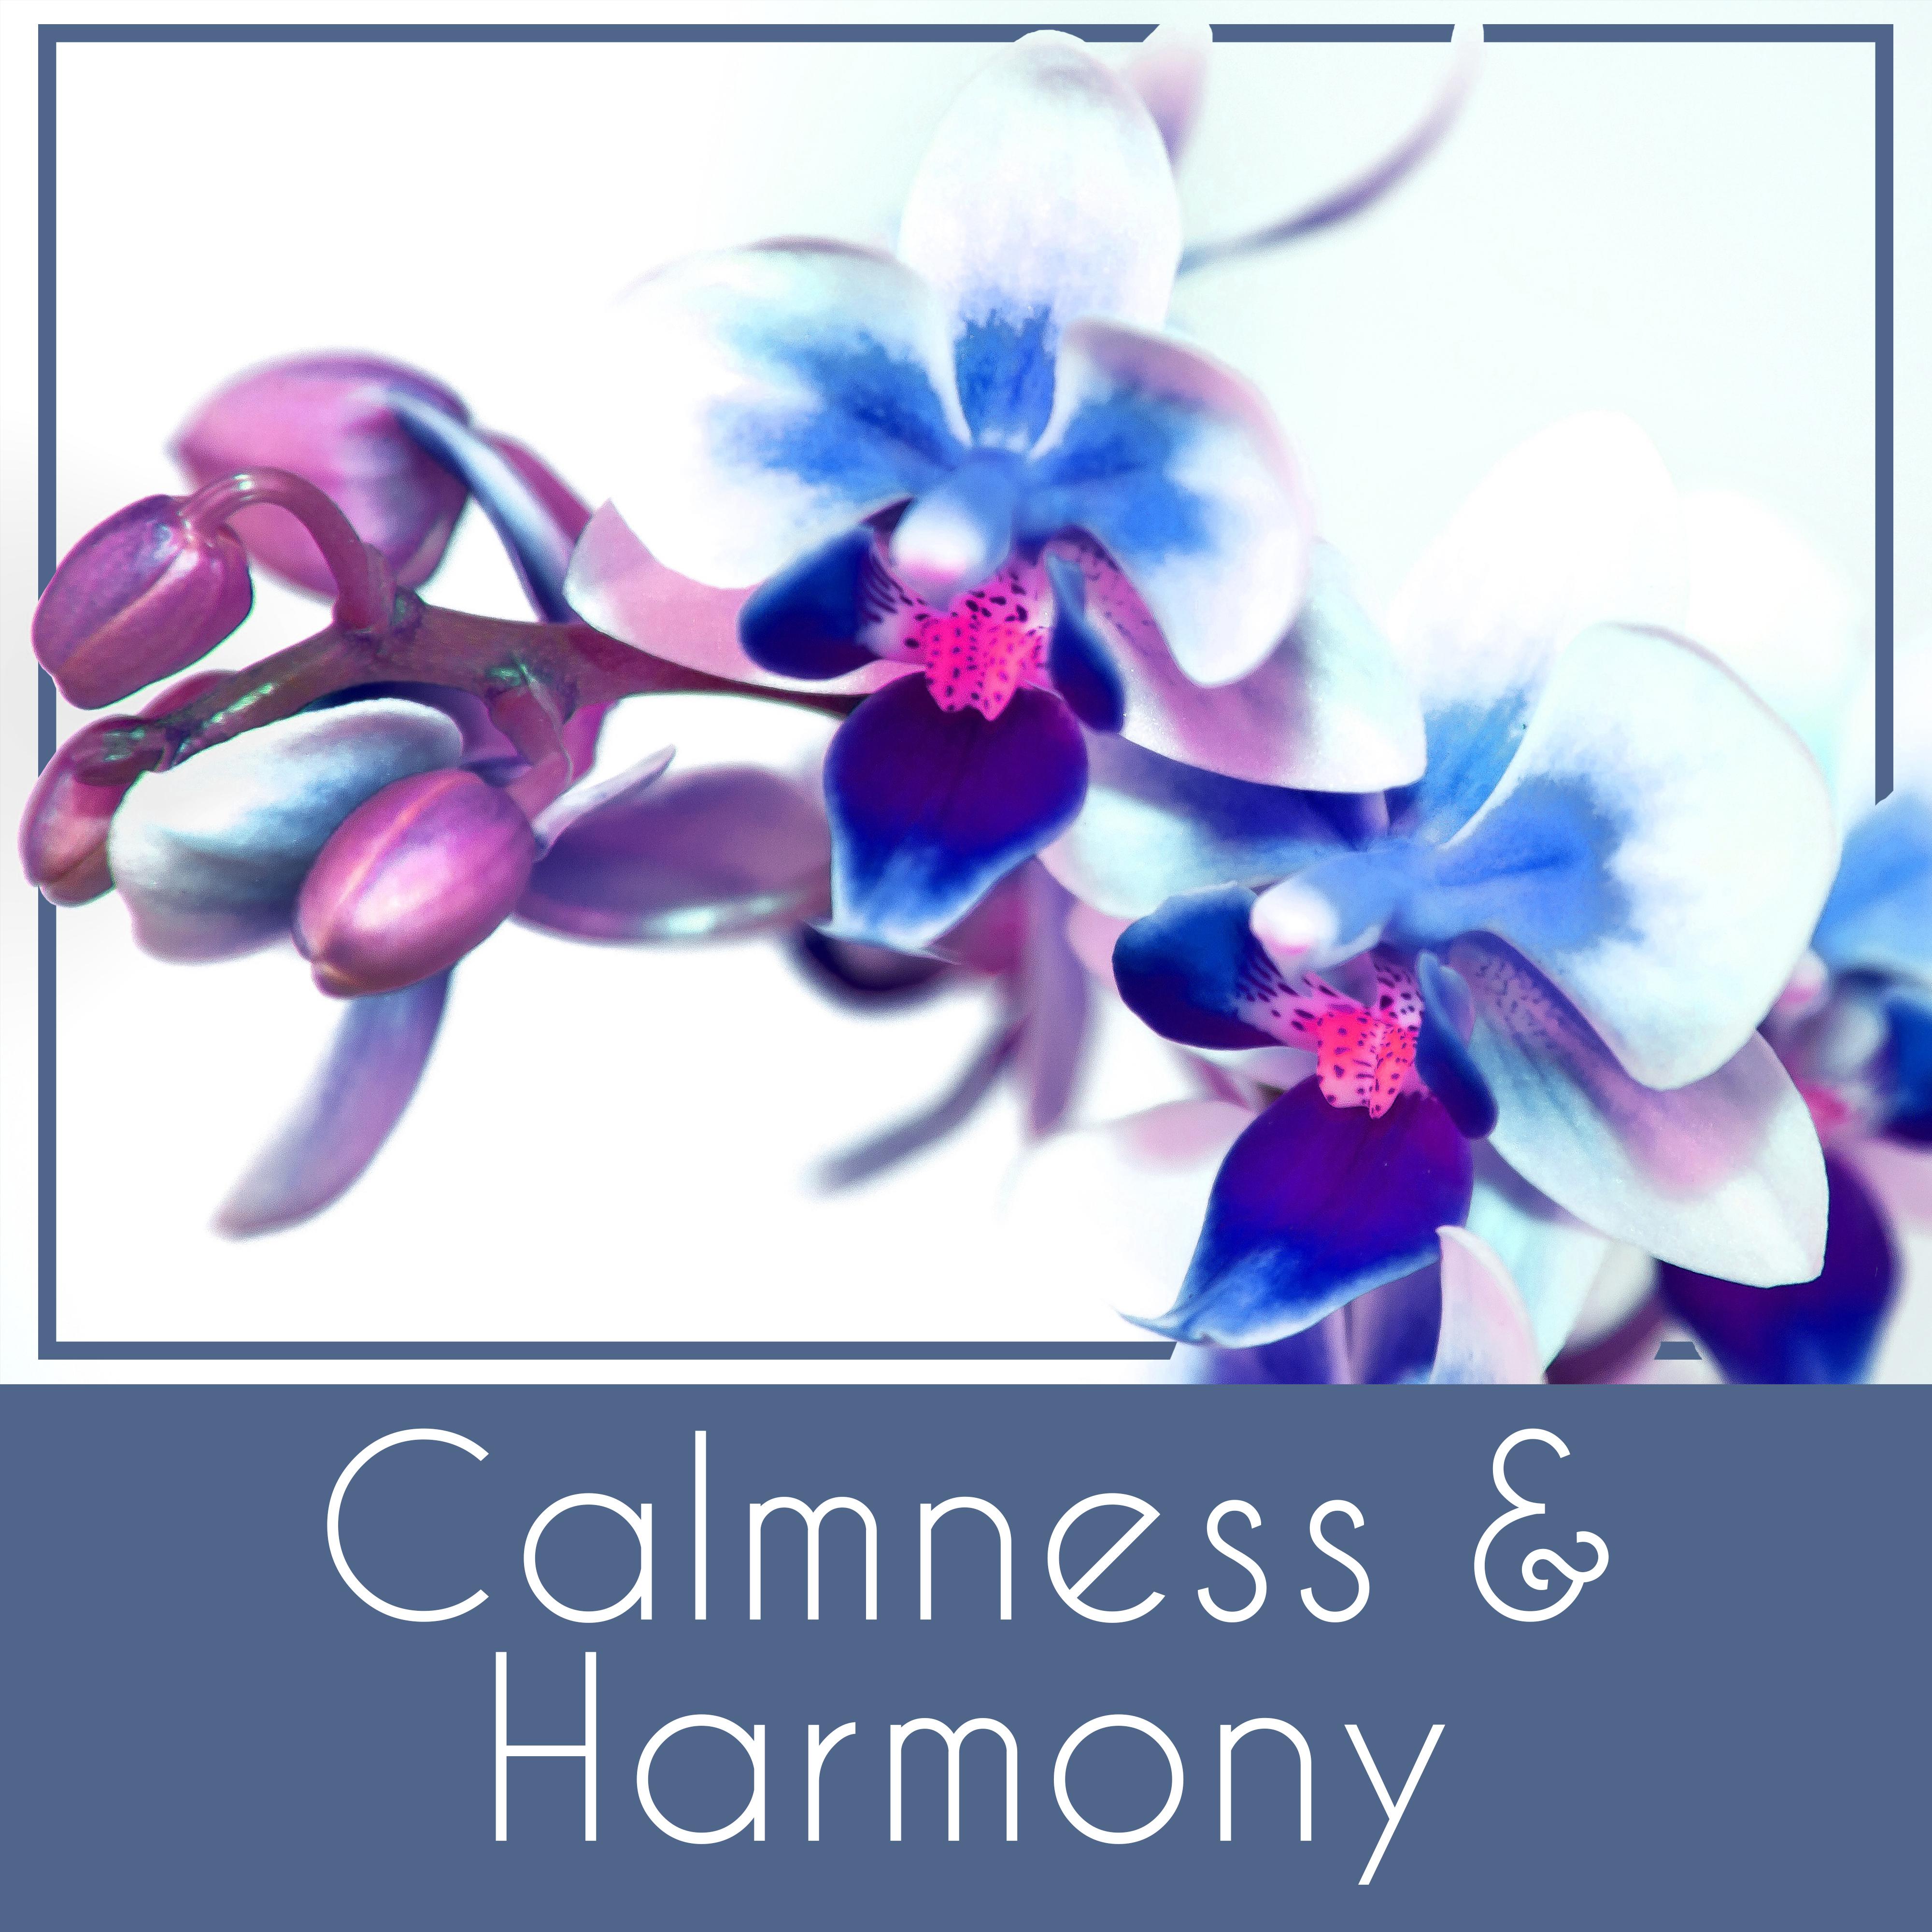 Calmness & Harmony – Spa Music, Deep Sleep, Nature Sounds, Pure Waves, Zen Garden, Soothing Melodies for Relaxation